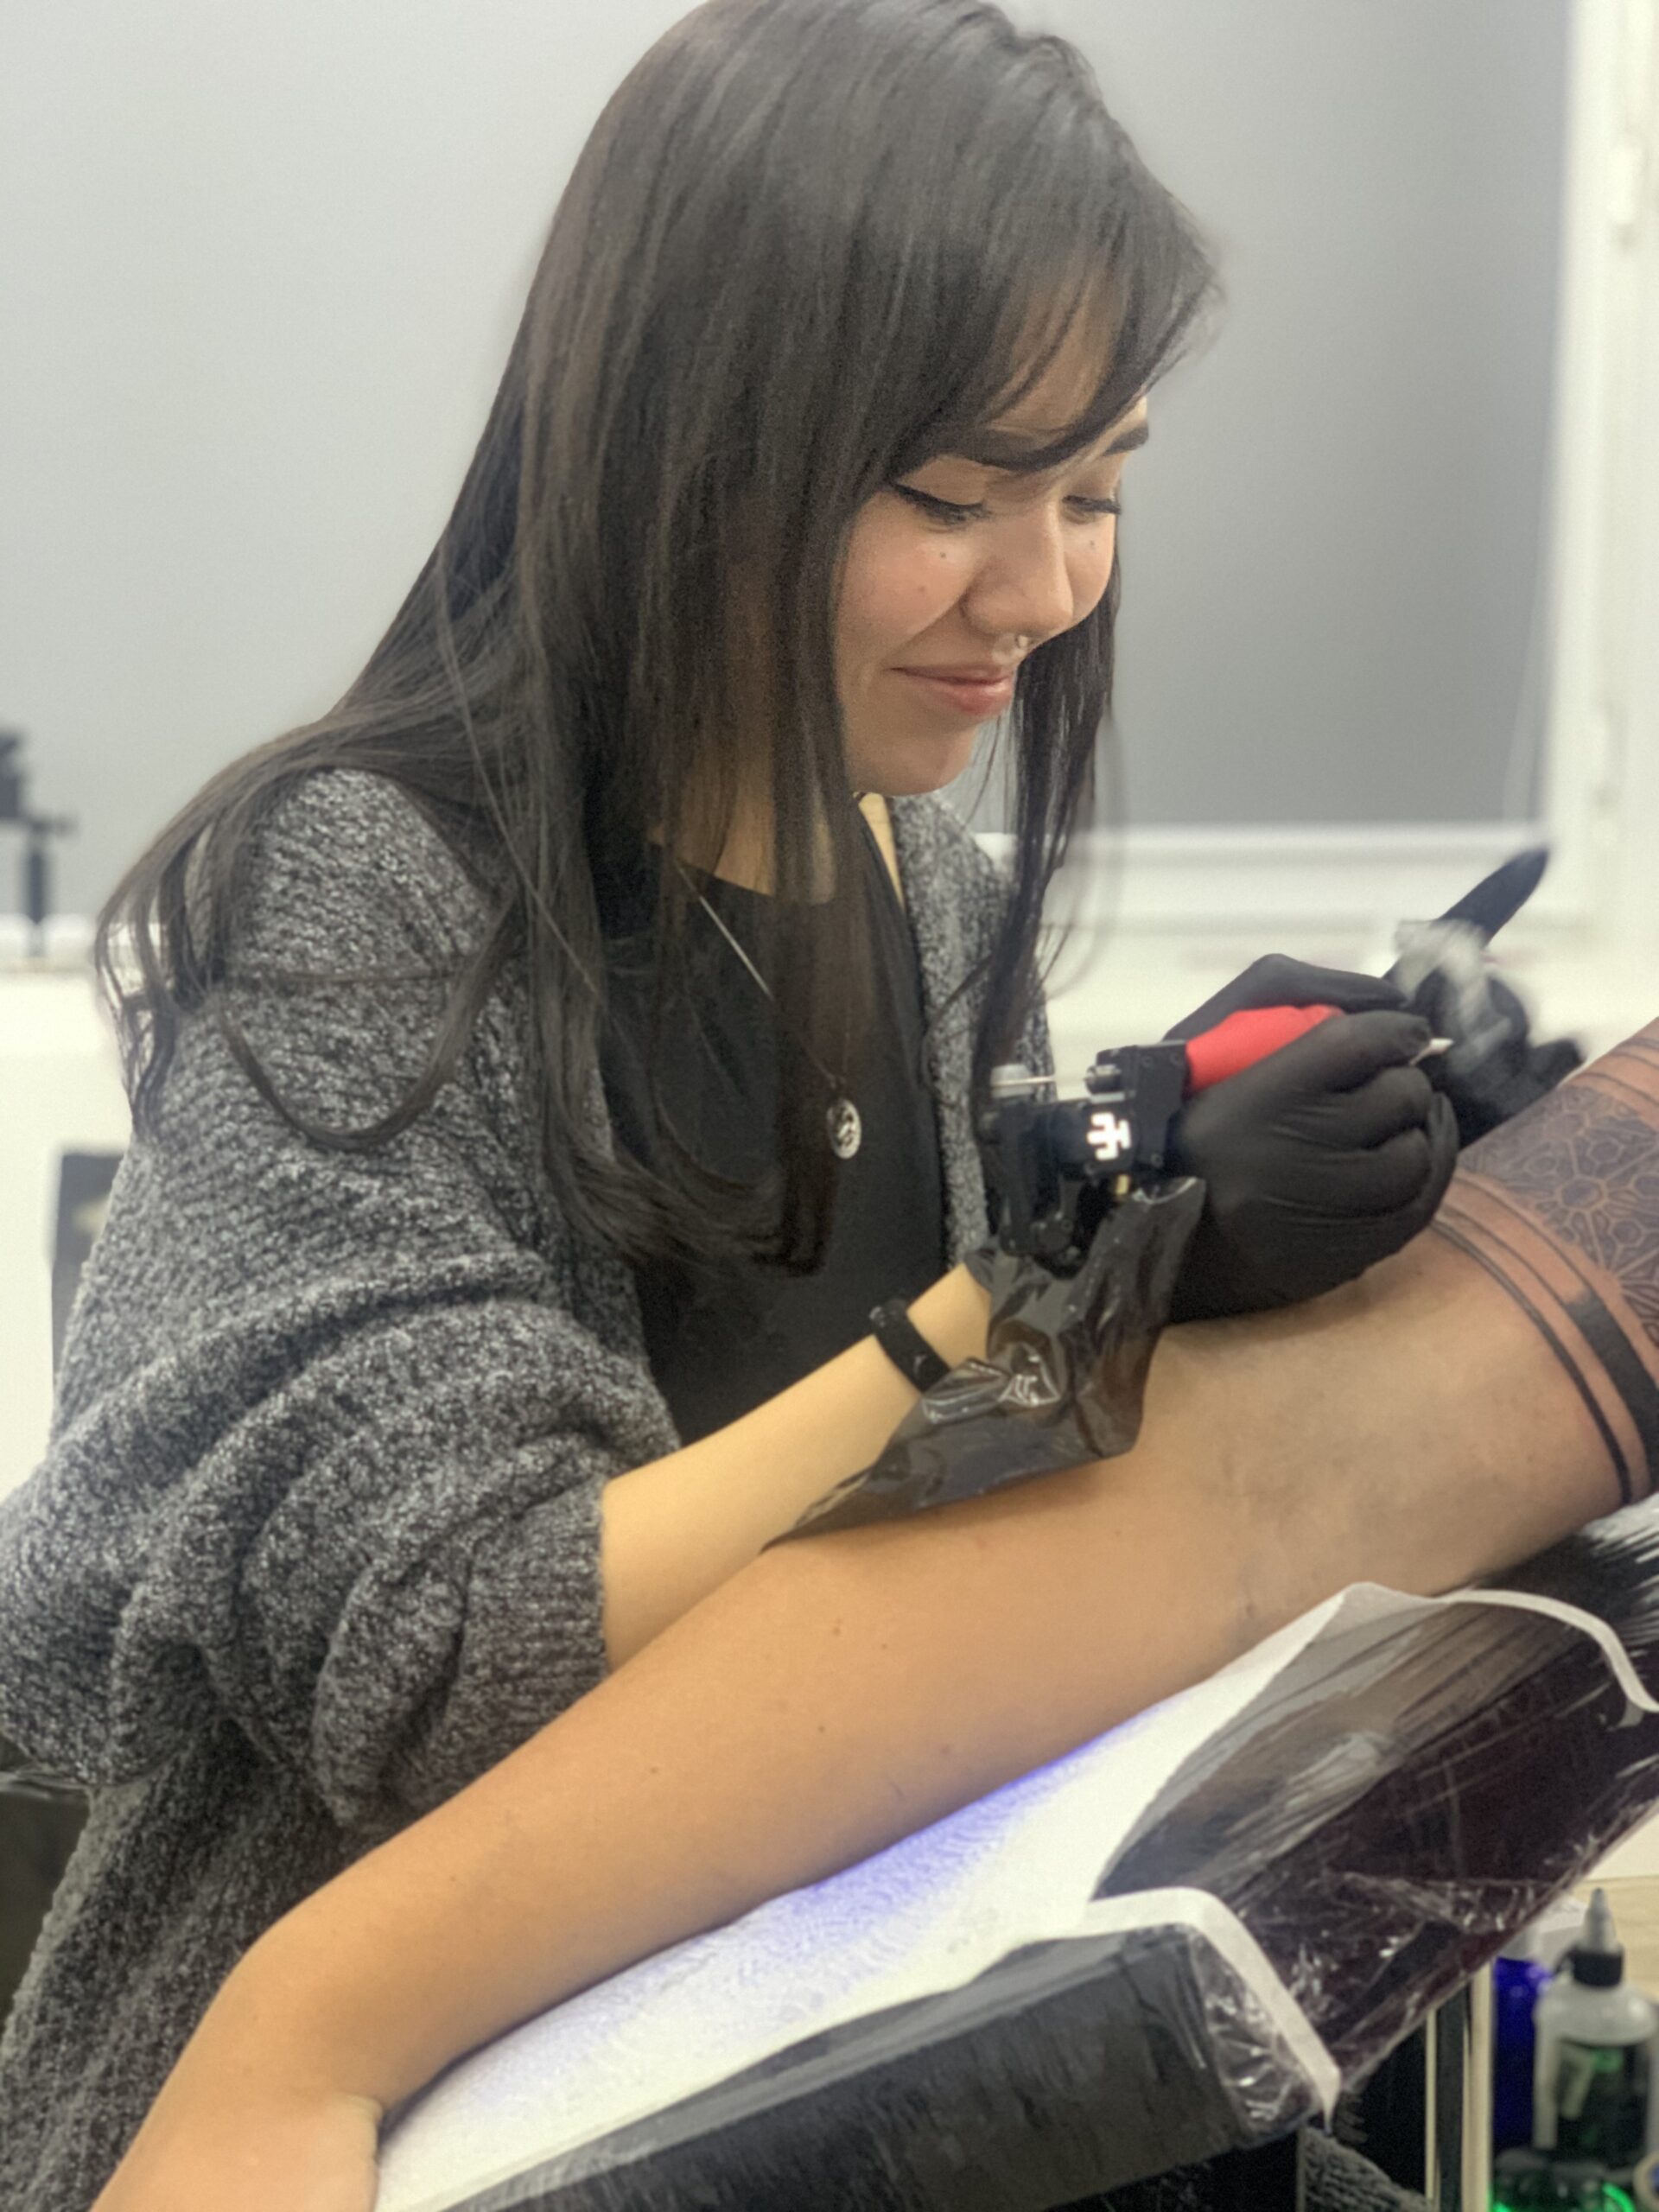 Saltanat Kuanova is in the process of applying a sleeve tattoo to a client scaled